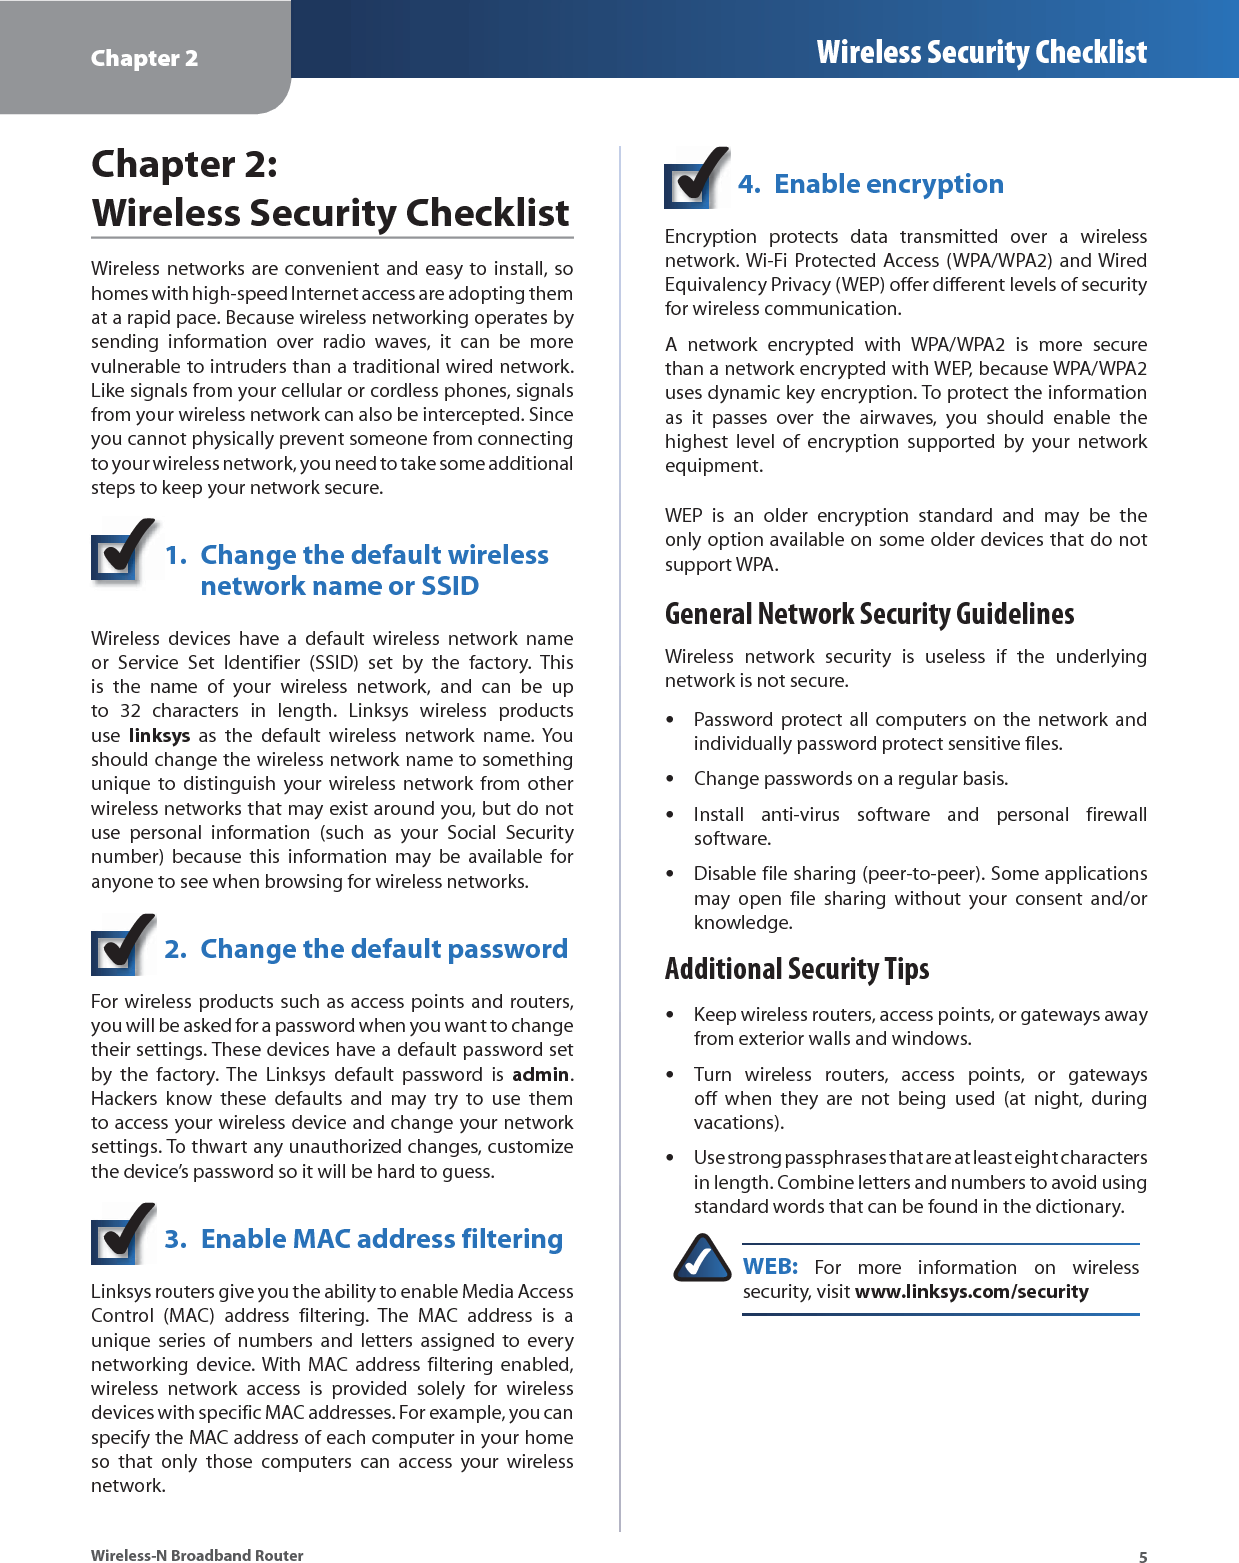 Chapter 2 Wireless Security Checklist5Wireless-N Broadband RouterChapter 2:  Wireless Security ChecklistWireless networks are convenient and easy to install, so homes with high-speed Internet access are adopting them at a rapid pace. Because wireless networking operates by sending information over radio waves, it can be more vulnerable to intruders than a traditional wired network. Like signals from your cellular or cordless phones, signals from your wireless network can also be intercepted. Since you cannot physically prevent someone from connecting to your wireless network, you need to take some additional steps to keep your network secure. 1.  Change the default wireless  network name or SSIDWireless devices have a default wireless network name or Service Set Identifier (SSID) set by the factory. This is the name of your wireless network, and can be up to 32 characters in length. Linksys wireless products use  linksys as the default wireless network name. You should change the wireless network name to something unique to distinguish your wireless network from other wireless networks that may exist around you, but do not use personal information (such as your Social Security number) because this information may be available for anyone to see when browsing for wireless networks. 2.  Change the default passwordFor wireless products such as access points and routers, you will be asked for a password when you want to change their settings. These devices have a default password set by the factory. The Linksys default password is admin. Hackers know these defaults and may try to use them to access your wireless device and change your network settings. To thwart any unauthorized changes, customize the device’s password so it will be hard to guess.3.  Enable MAC address filteringLinksys routers give you the ability to enable Media Access Control (MAC) address filtering. The MAC address is a unique series of numbers and letters assigned to every networking device. With MAC address filtering enabled, wireless network access is provided solely for wireless devices with specific MAC addresses. For example, you can specify the MAC address of each computer in your home so that only those computers can access your wireless network. 4.  Enable encryptionEncryption protects data transmitted over a wireless network. Wi-Fi Protected Access (WPA/WPA2) and Wired Equivalency Privacy (WEP) offer different levels of security for wireless communication.A network encrypted with WPA/WPA2 is more secure than a network encrypted with WEP, because WPA/WPA2 uses dynamic key encryption. To protect the information as it passes over the airwaves, you should enable the highest level of encryption supported by your network equipment. WEP is an older encryption standard and may be the only option available on some older devices that do not support WPA.General Network Security GuidelinesWireless network security is useless if the underlying network is not secure. Password protect all computers on the network and individually password protect sensitive files.Change passwords on a regular basis.Install anti-virus software and personal firewall software.Disable file sharing (peer-to-peer). Some applications may open file sharing without your consent and/or knowledge.Additional Security TipsKeep wireless routers, access points, or gateways away from exterior walls and windows.Turn wireless routers, access points, or gateways off when they are not being used (at night, during vacations).Use strong passphrases that are at least eight characters in length. Combine letters and numbers to avoid using standard words that can be found in the dictionary. WEB: For more information on wireless security, visit www.linksys.com/security•••••••